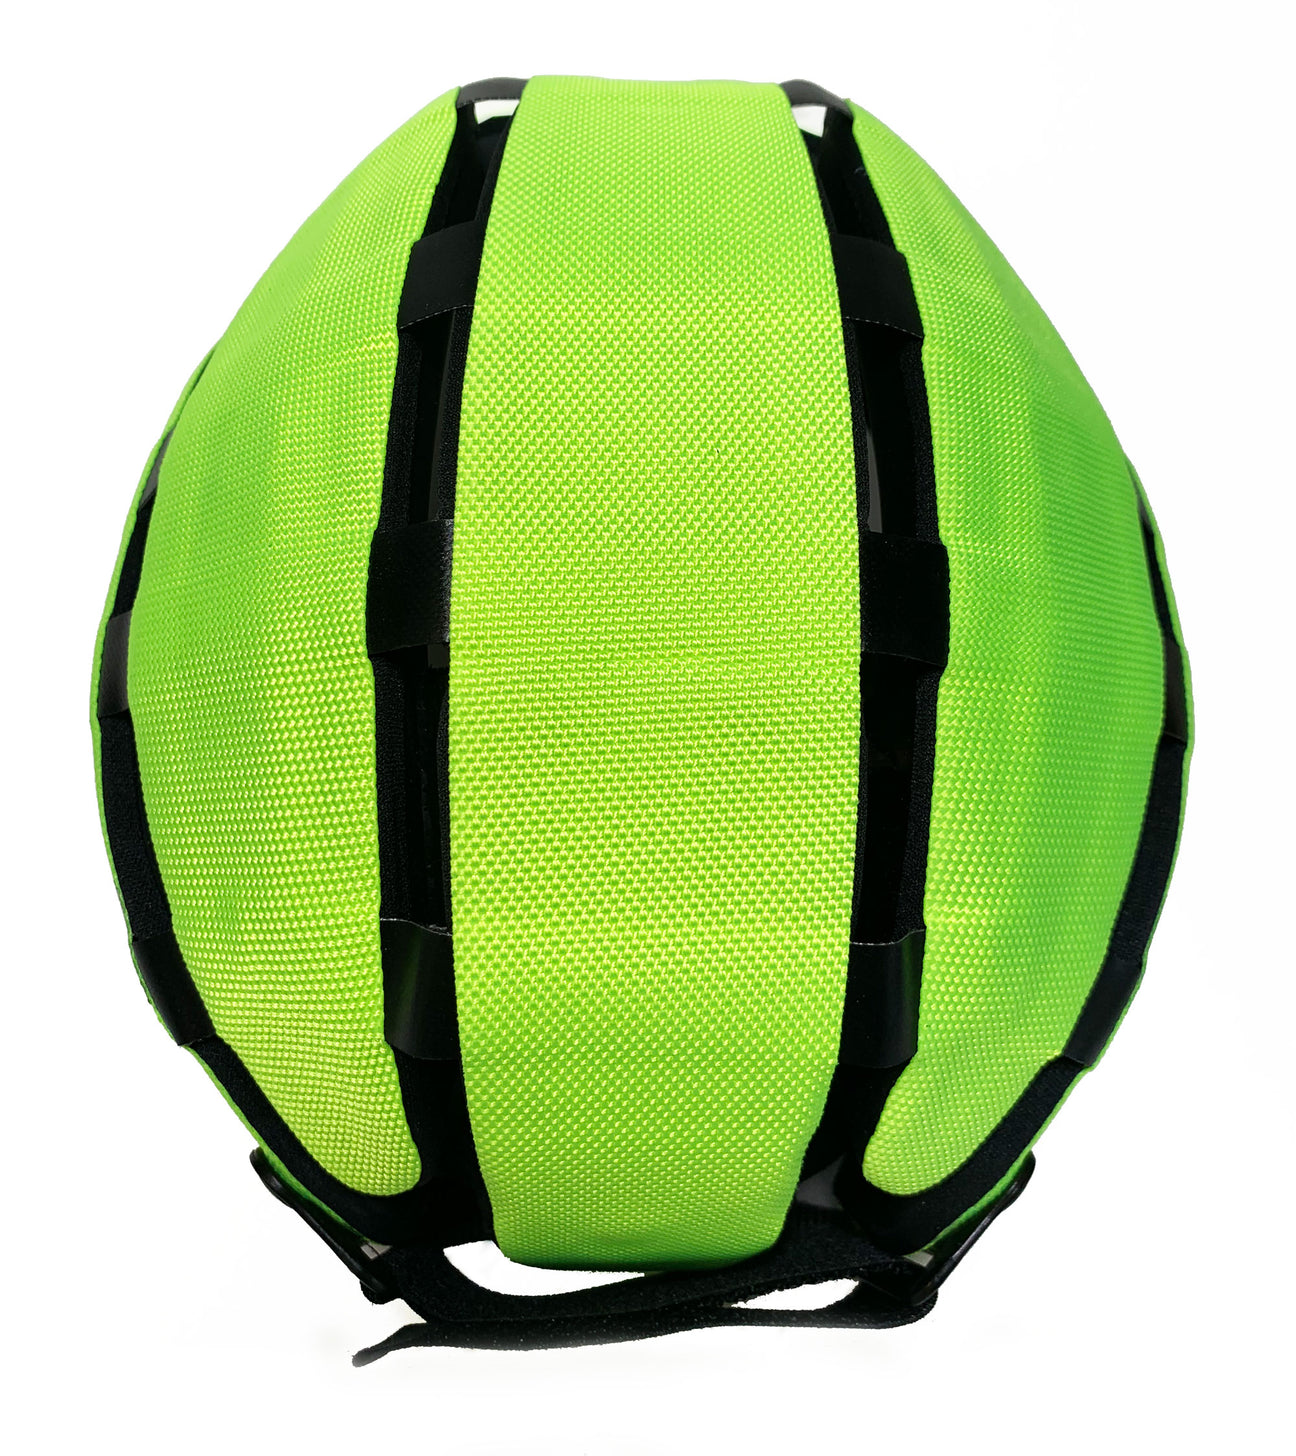 CASQUE PLIABLE HEDKAYSE JAUNE